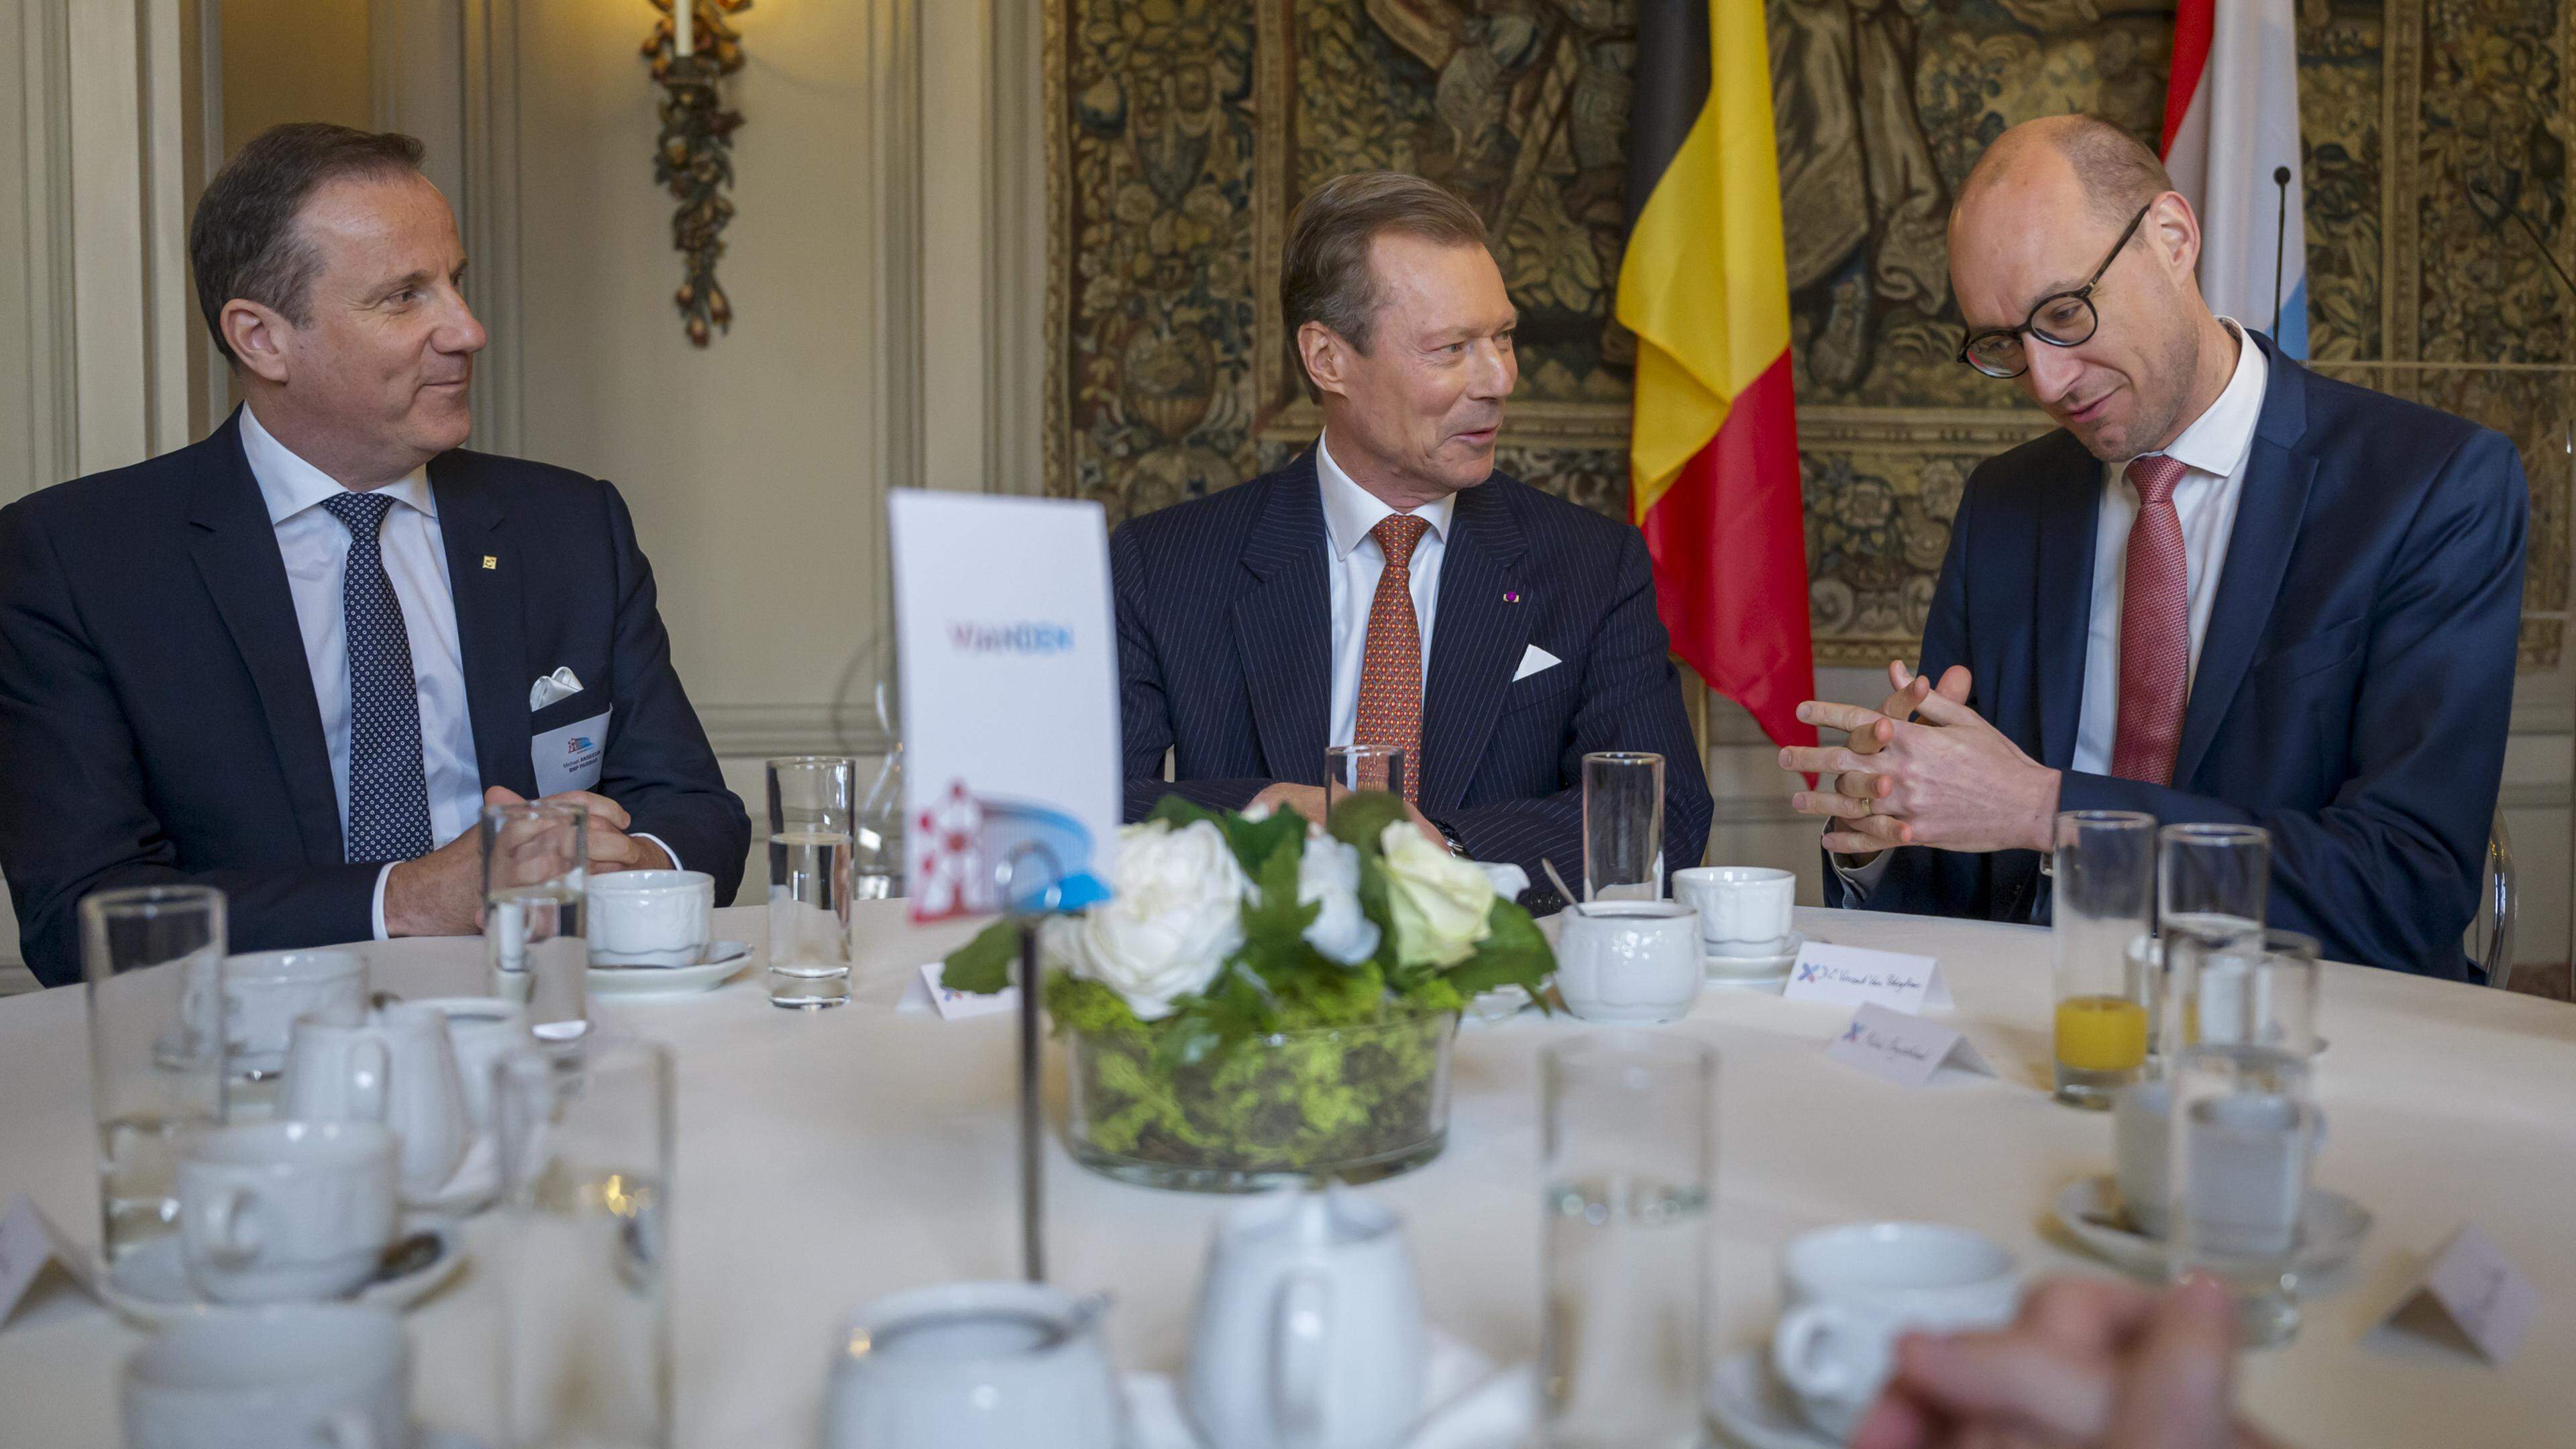 BNP Paribas CEO and Chairman Michael Anseeuw (left) and Belgian Finance Minister Vincent Van Peteghem (right) dine with Luxembourg’s Grand Duke Henri during his visit to Belgium on 17 April